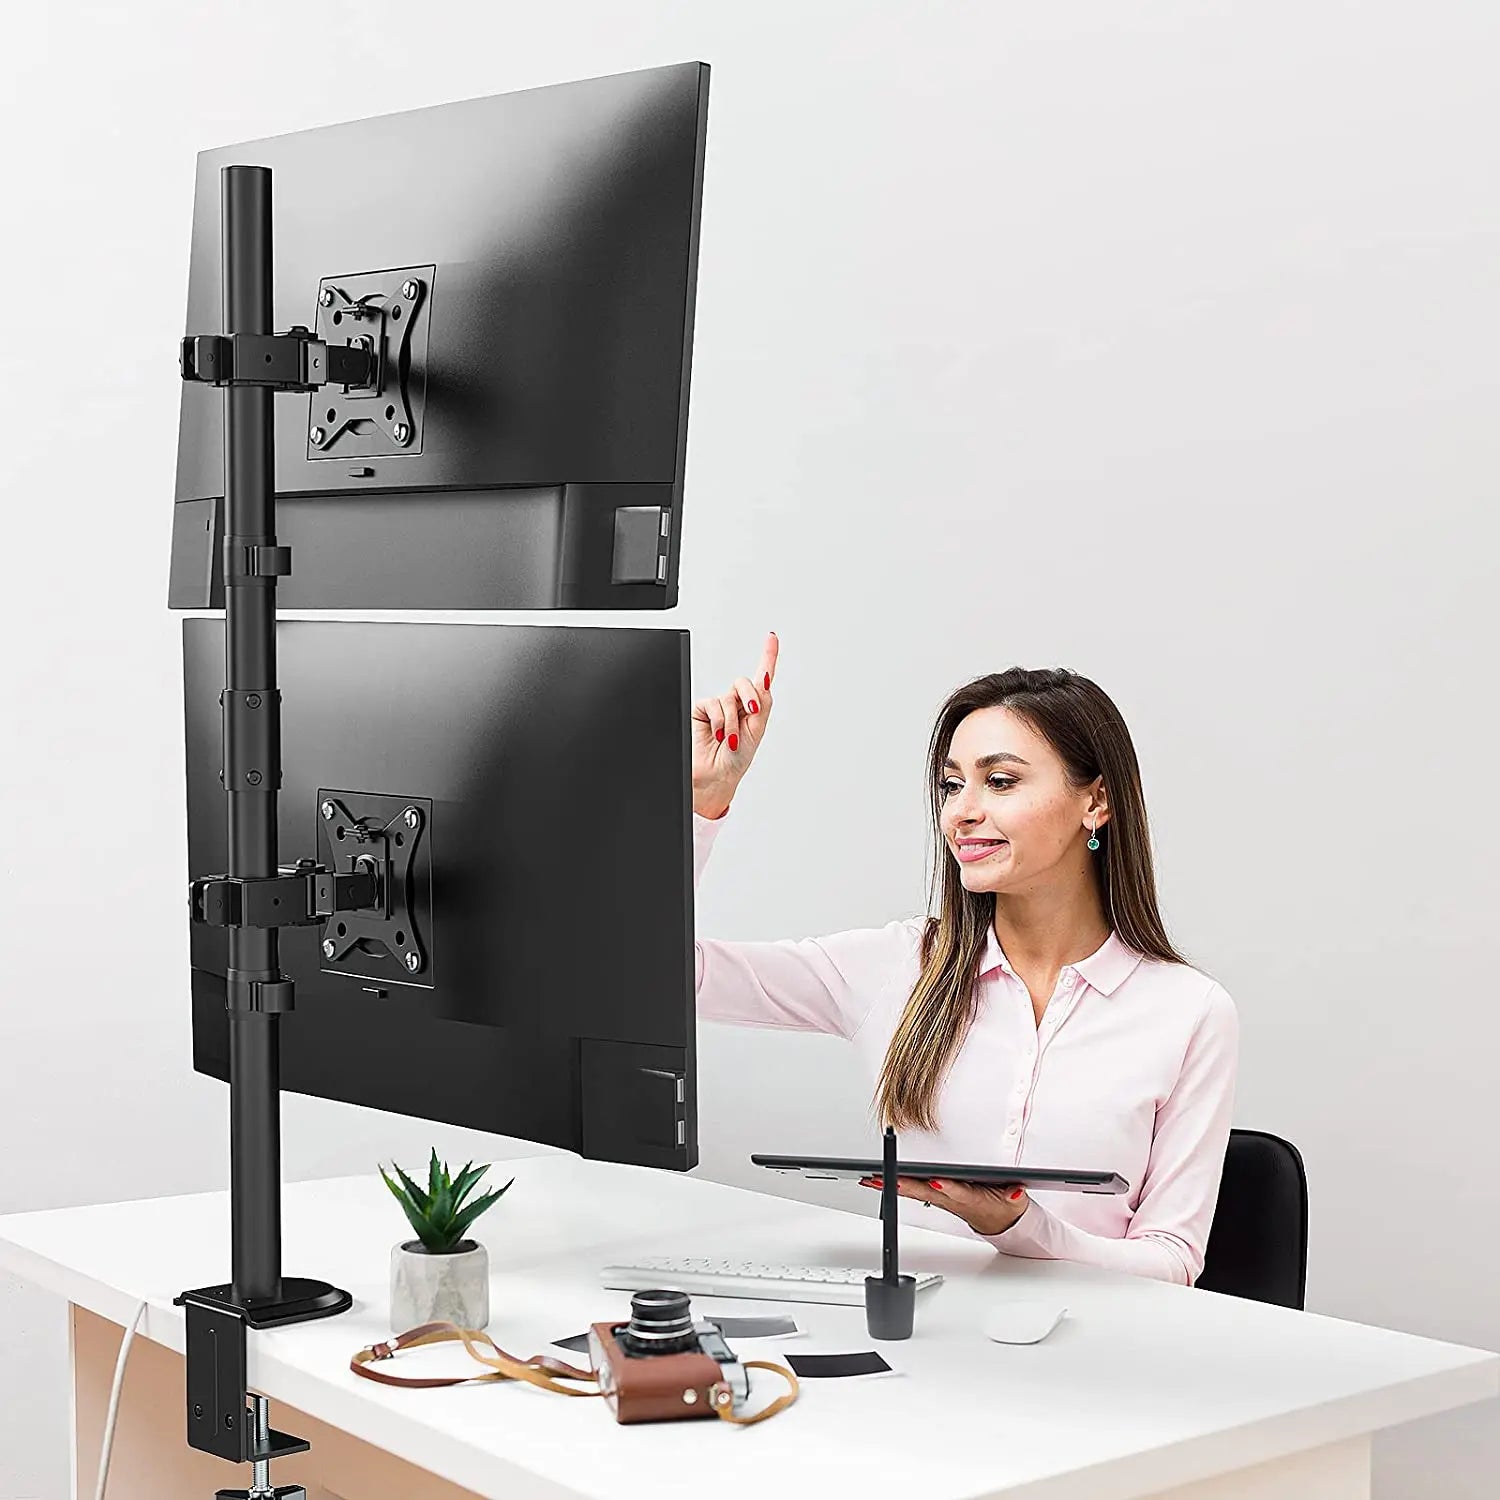 Dual Monitor Stand, Heavy Duty Vertical Stack Monitor Mount for 2 Screens Up to 32", Extra Tall 31.6" Pole Monitor Desk Mount, VESA 75x75/100x100, with C Clamp/Grommet Base, Black PUTORSEN